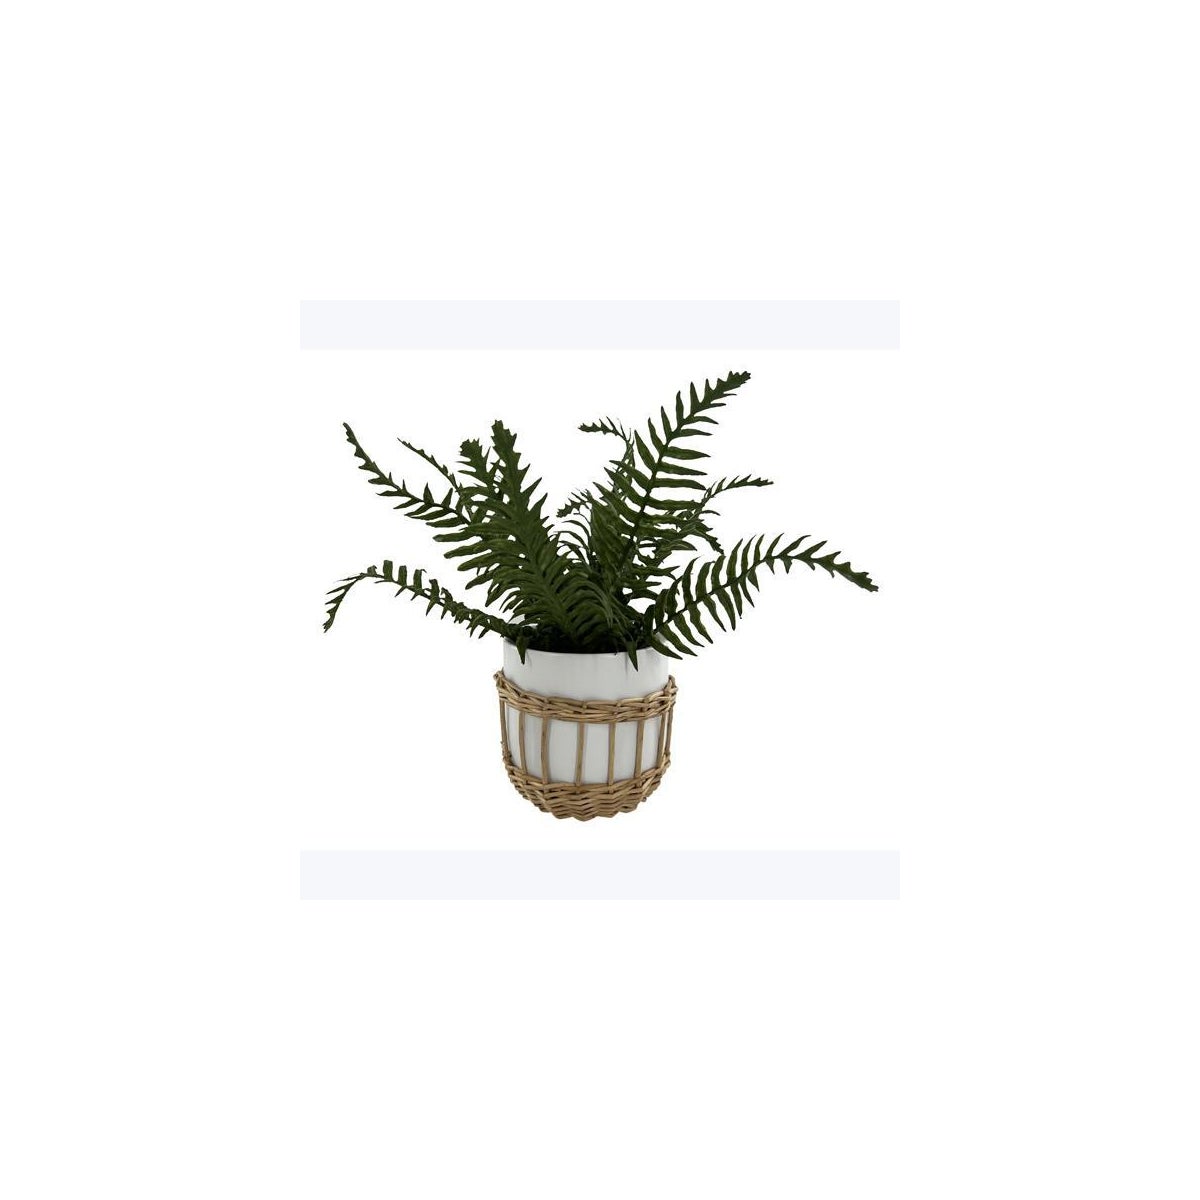 Artificial Fern in Ceramic Pot with Basket Cover